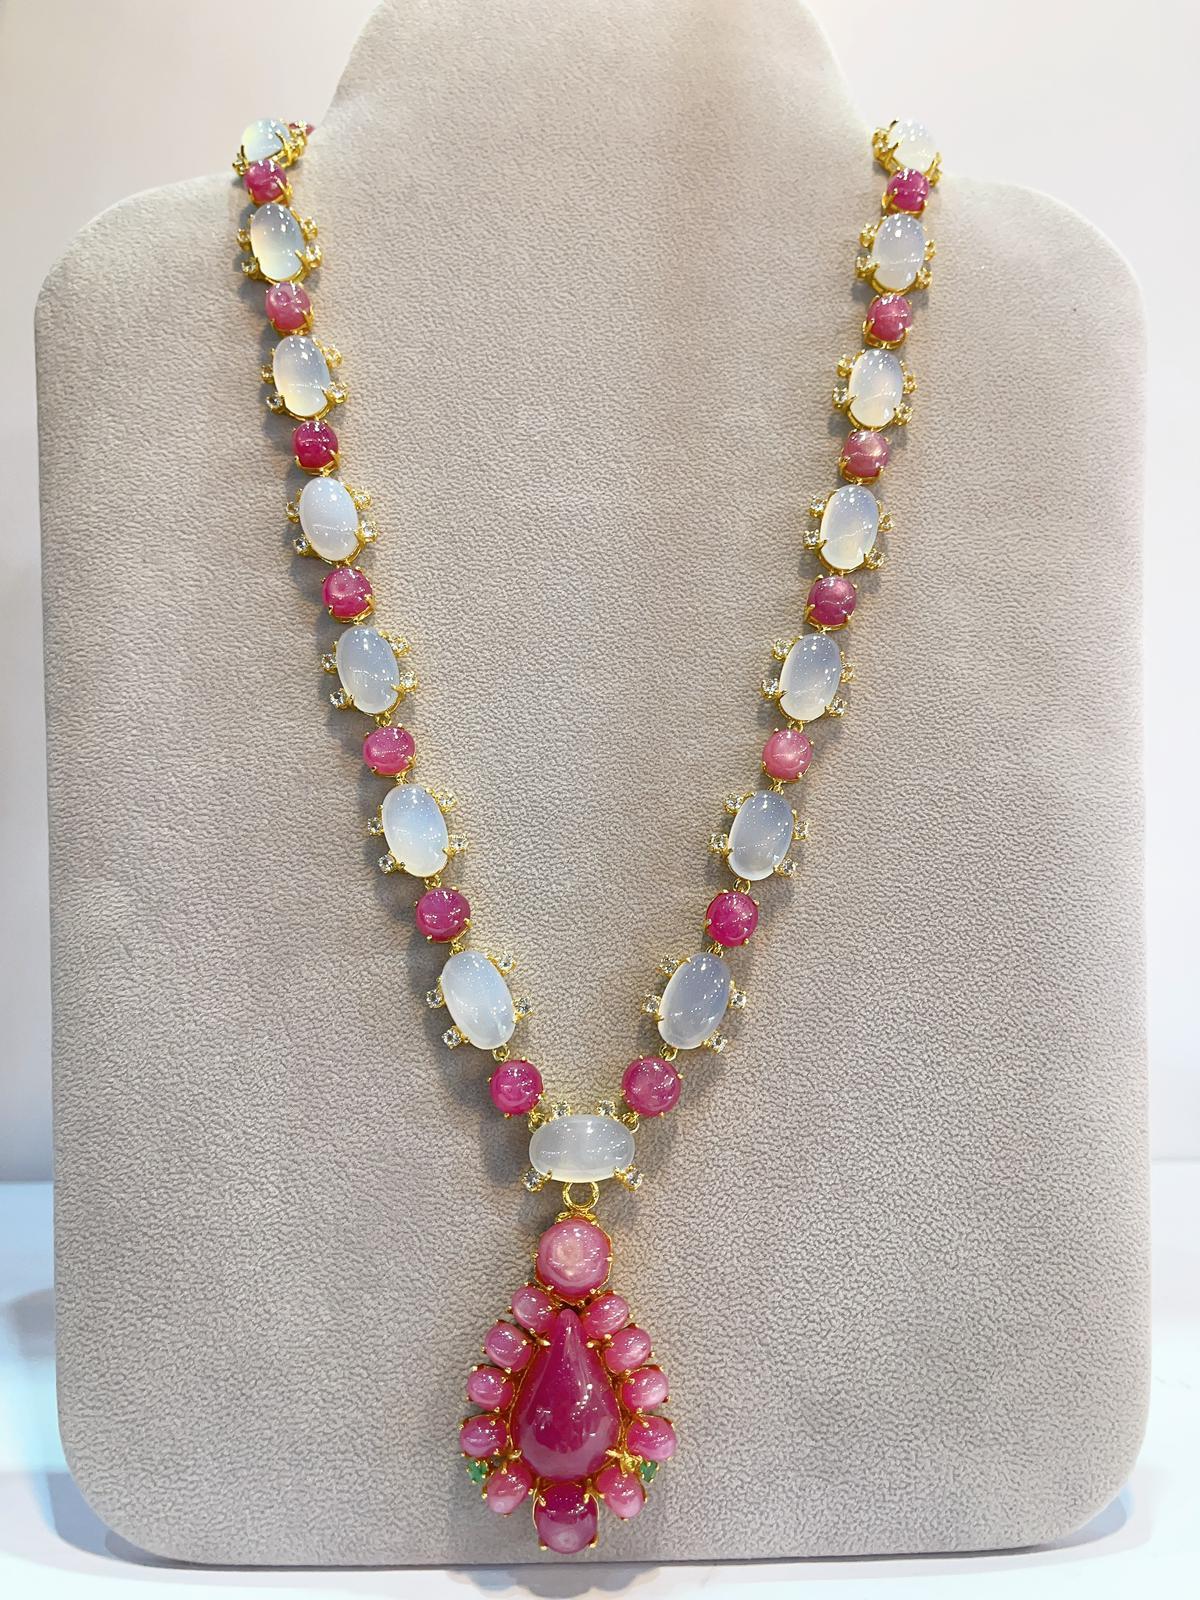 Fantastic Bochic “Capri” Multi Natural Gem Necklace
Natural Ruby, Colors - Red, Pink, 35 Carats 
Shape cabochons 
Large Ruby drop - Pear shape 
Natural White Carsidoni - 34 Carats 
Shape - Oval shapes 
Set in 22K Gold and Silver 
This Necklace is a